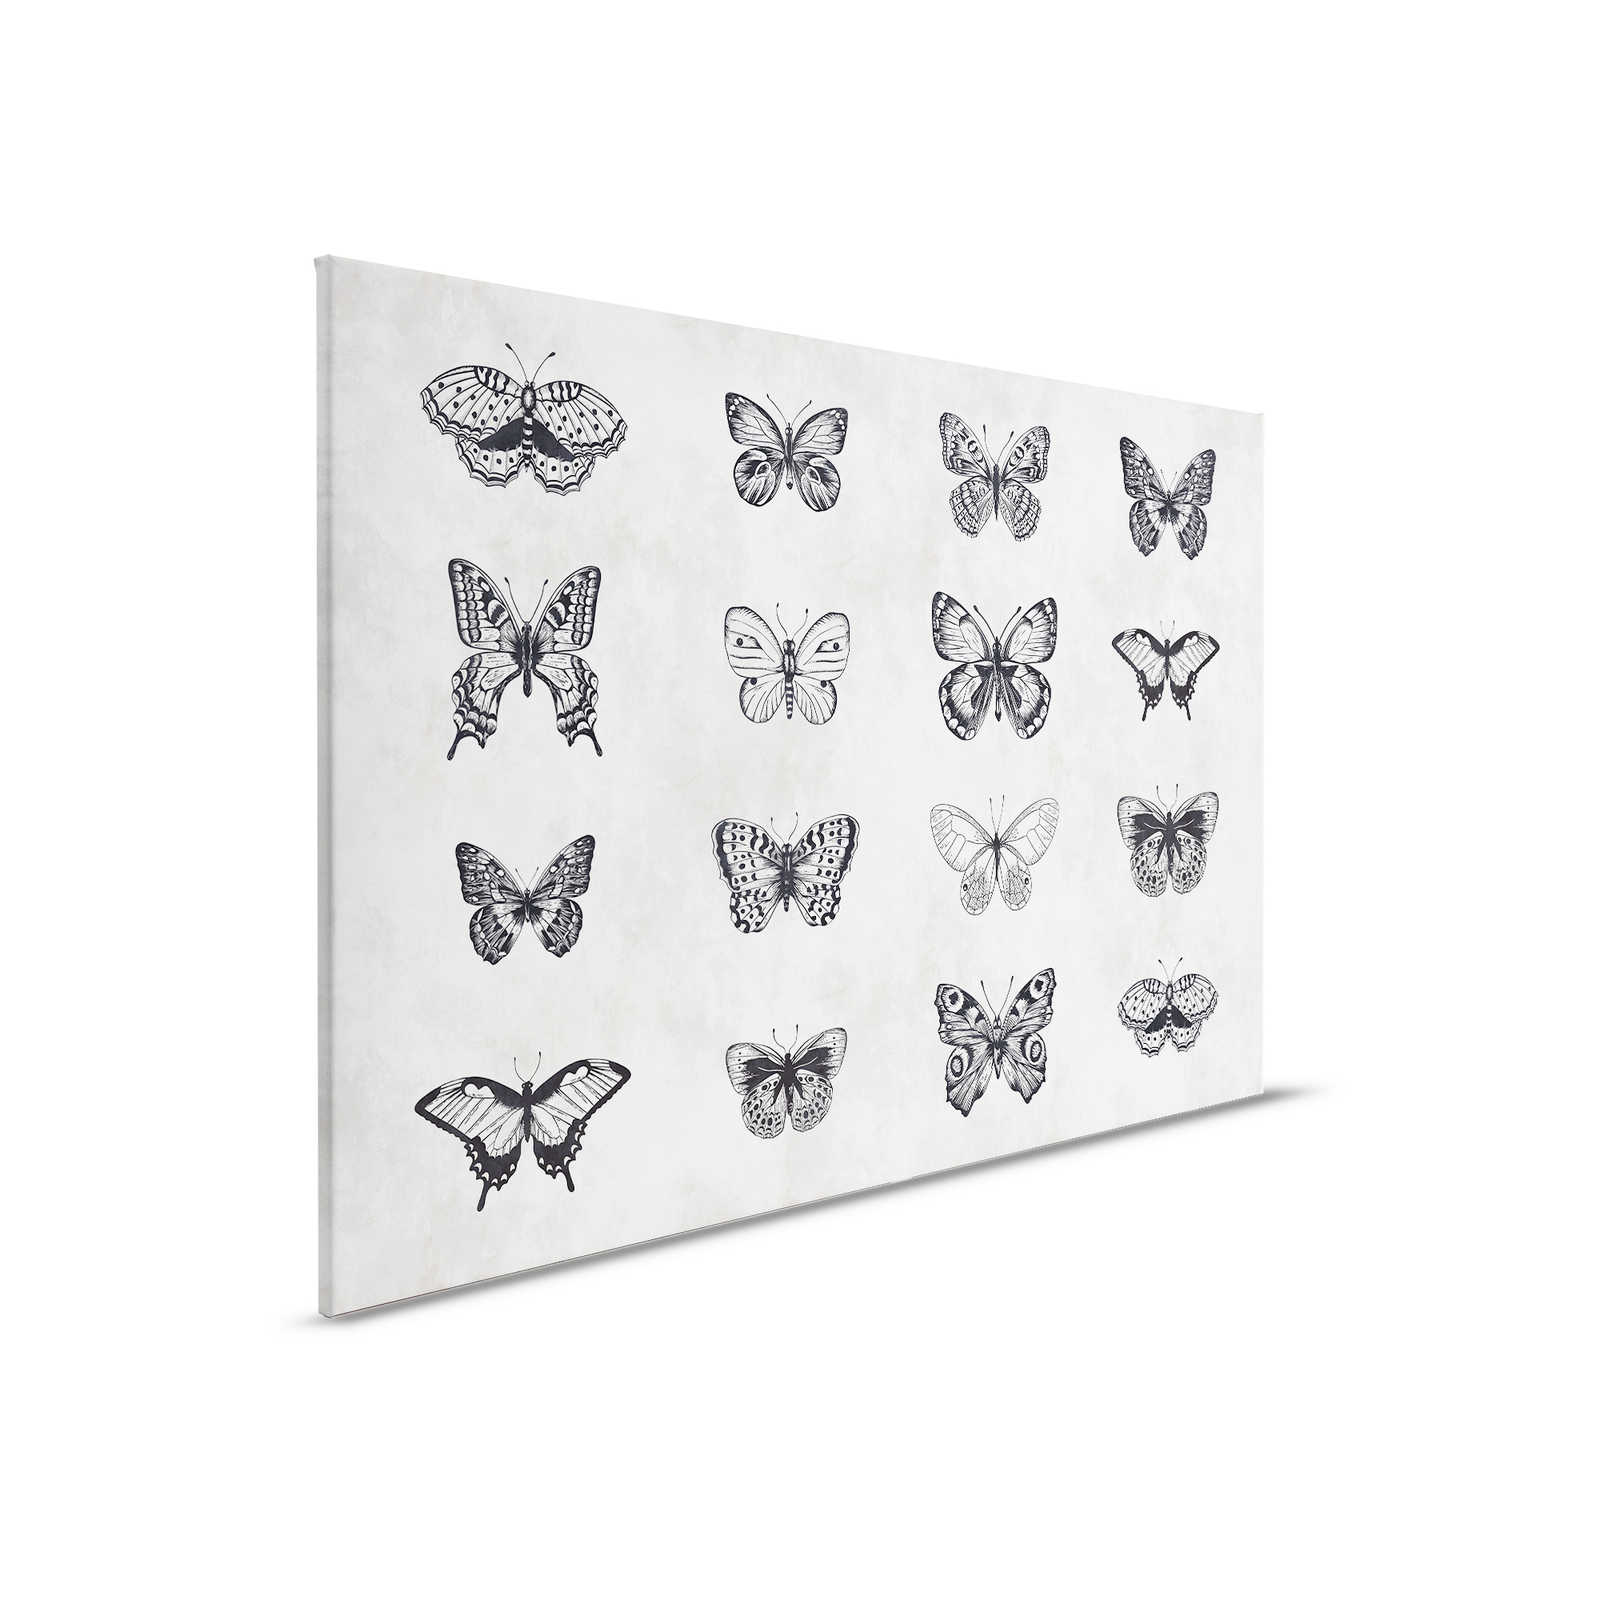         Butterfly Canvas Painting Black & White Drawings - 0.90 m x 0.60 m
    